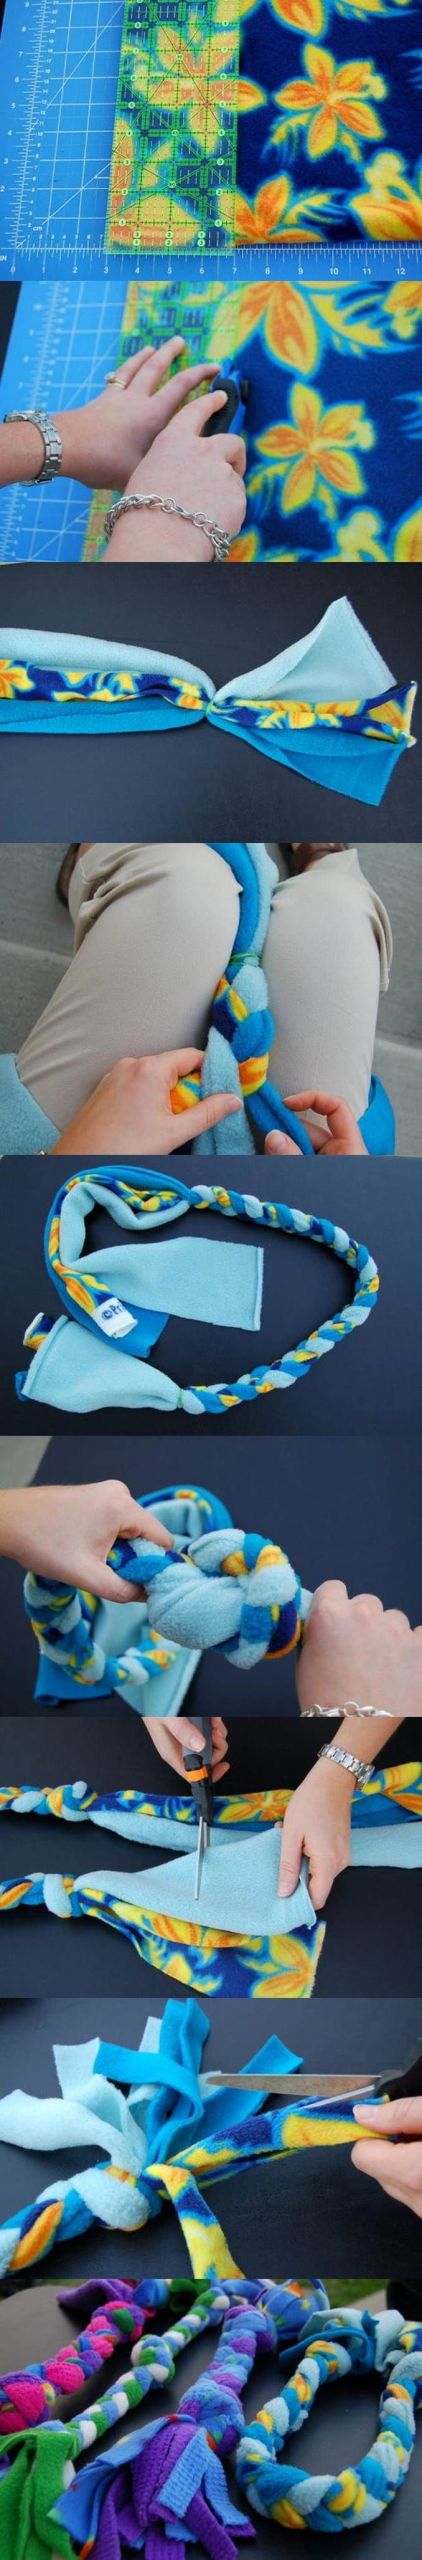 DIY Rope Dog Toy
 DIY Fleece Rope Dog Toy 2 Has dimensions I make these for